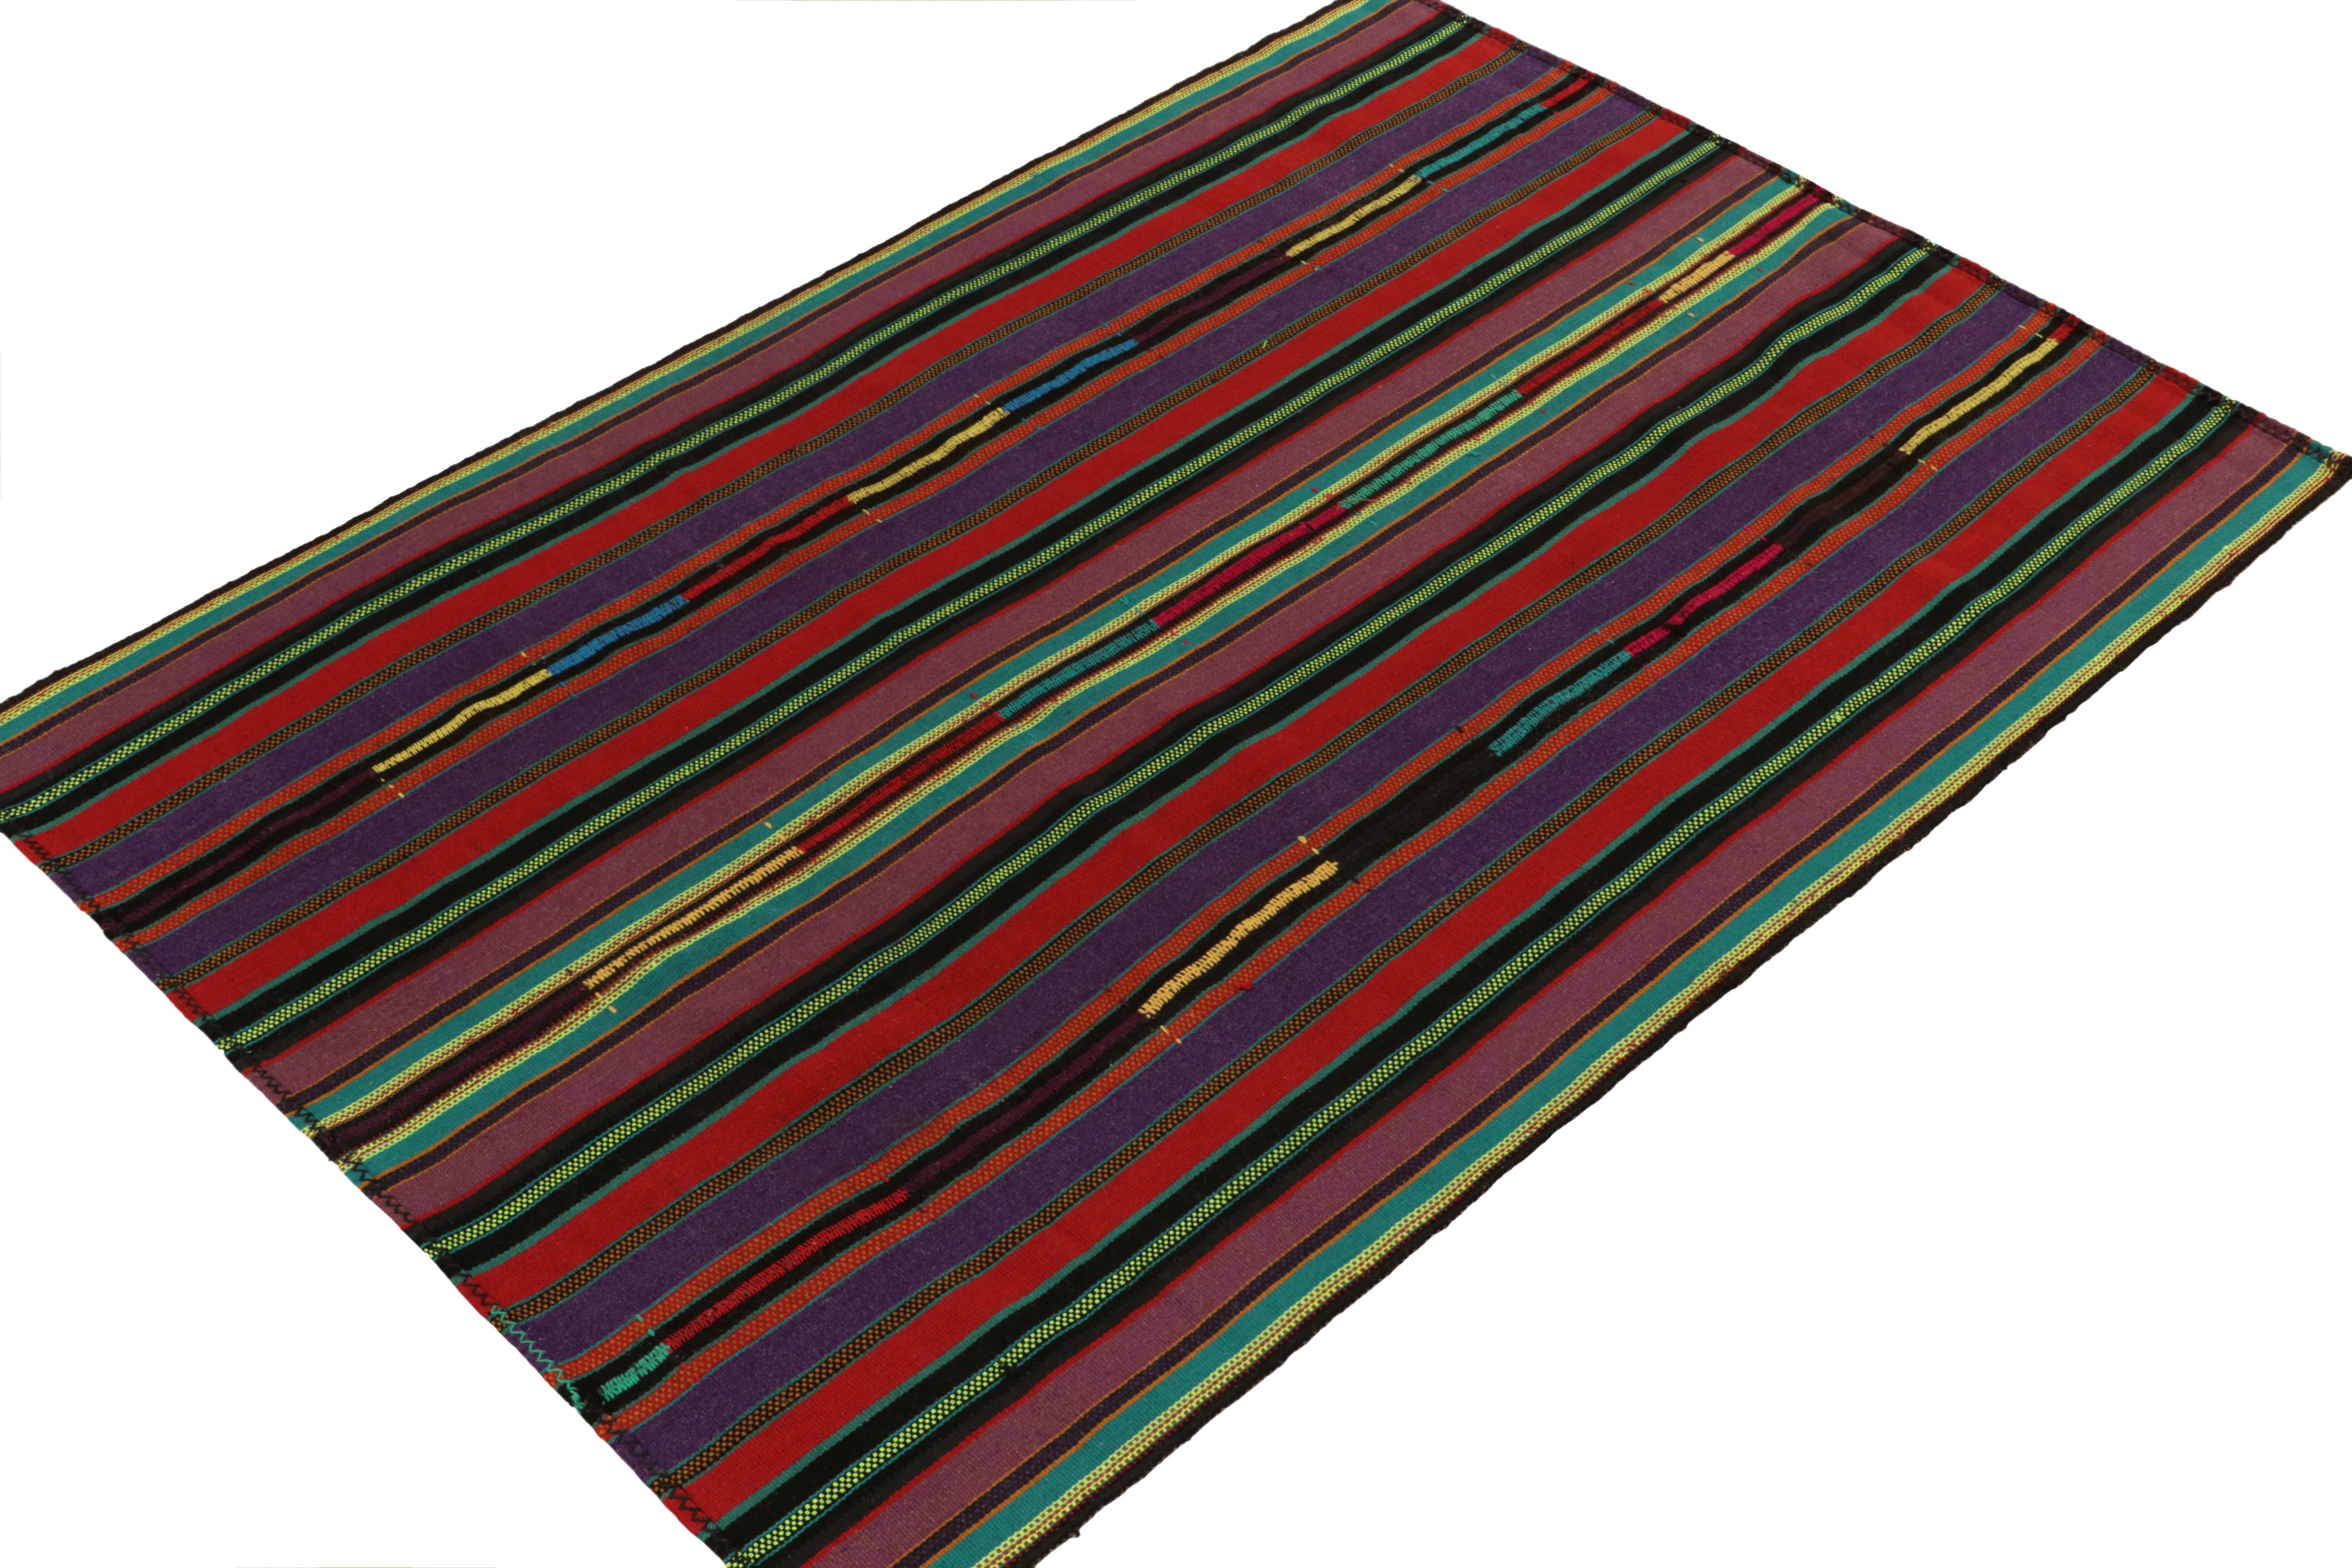 Mid-Century Modern 1950s Vintage Kilim Style in Red, Purple, Green Stripe Patterns by Rug & Kilim For Sale